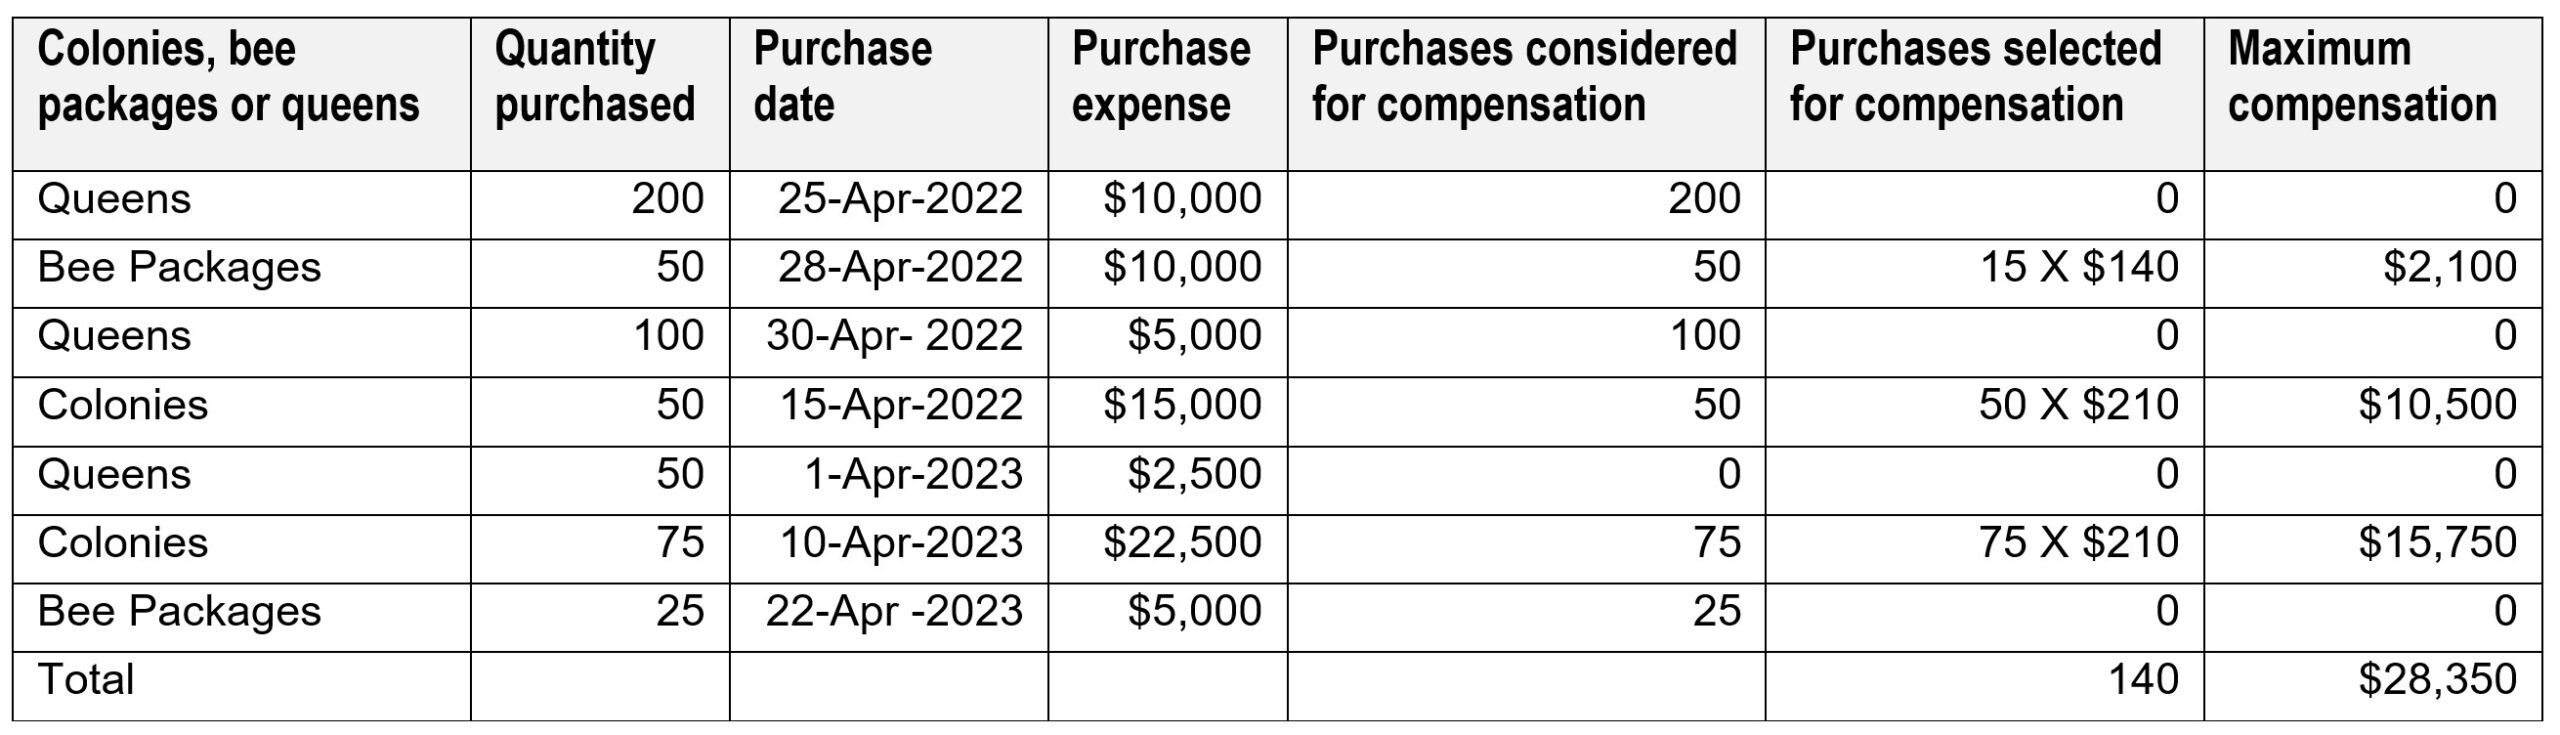 Example of maximum 2023 bee purchases eligible to considered for compensation.